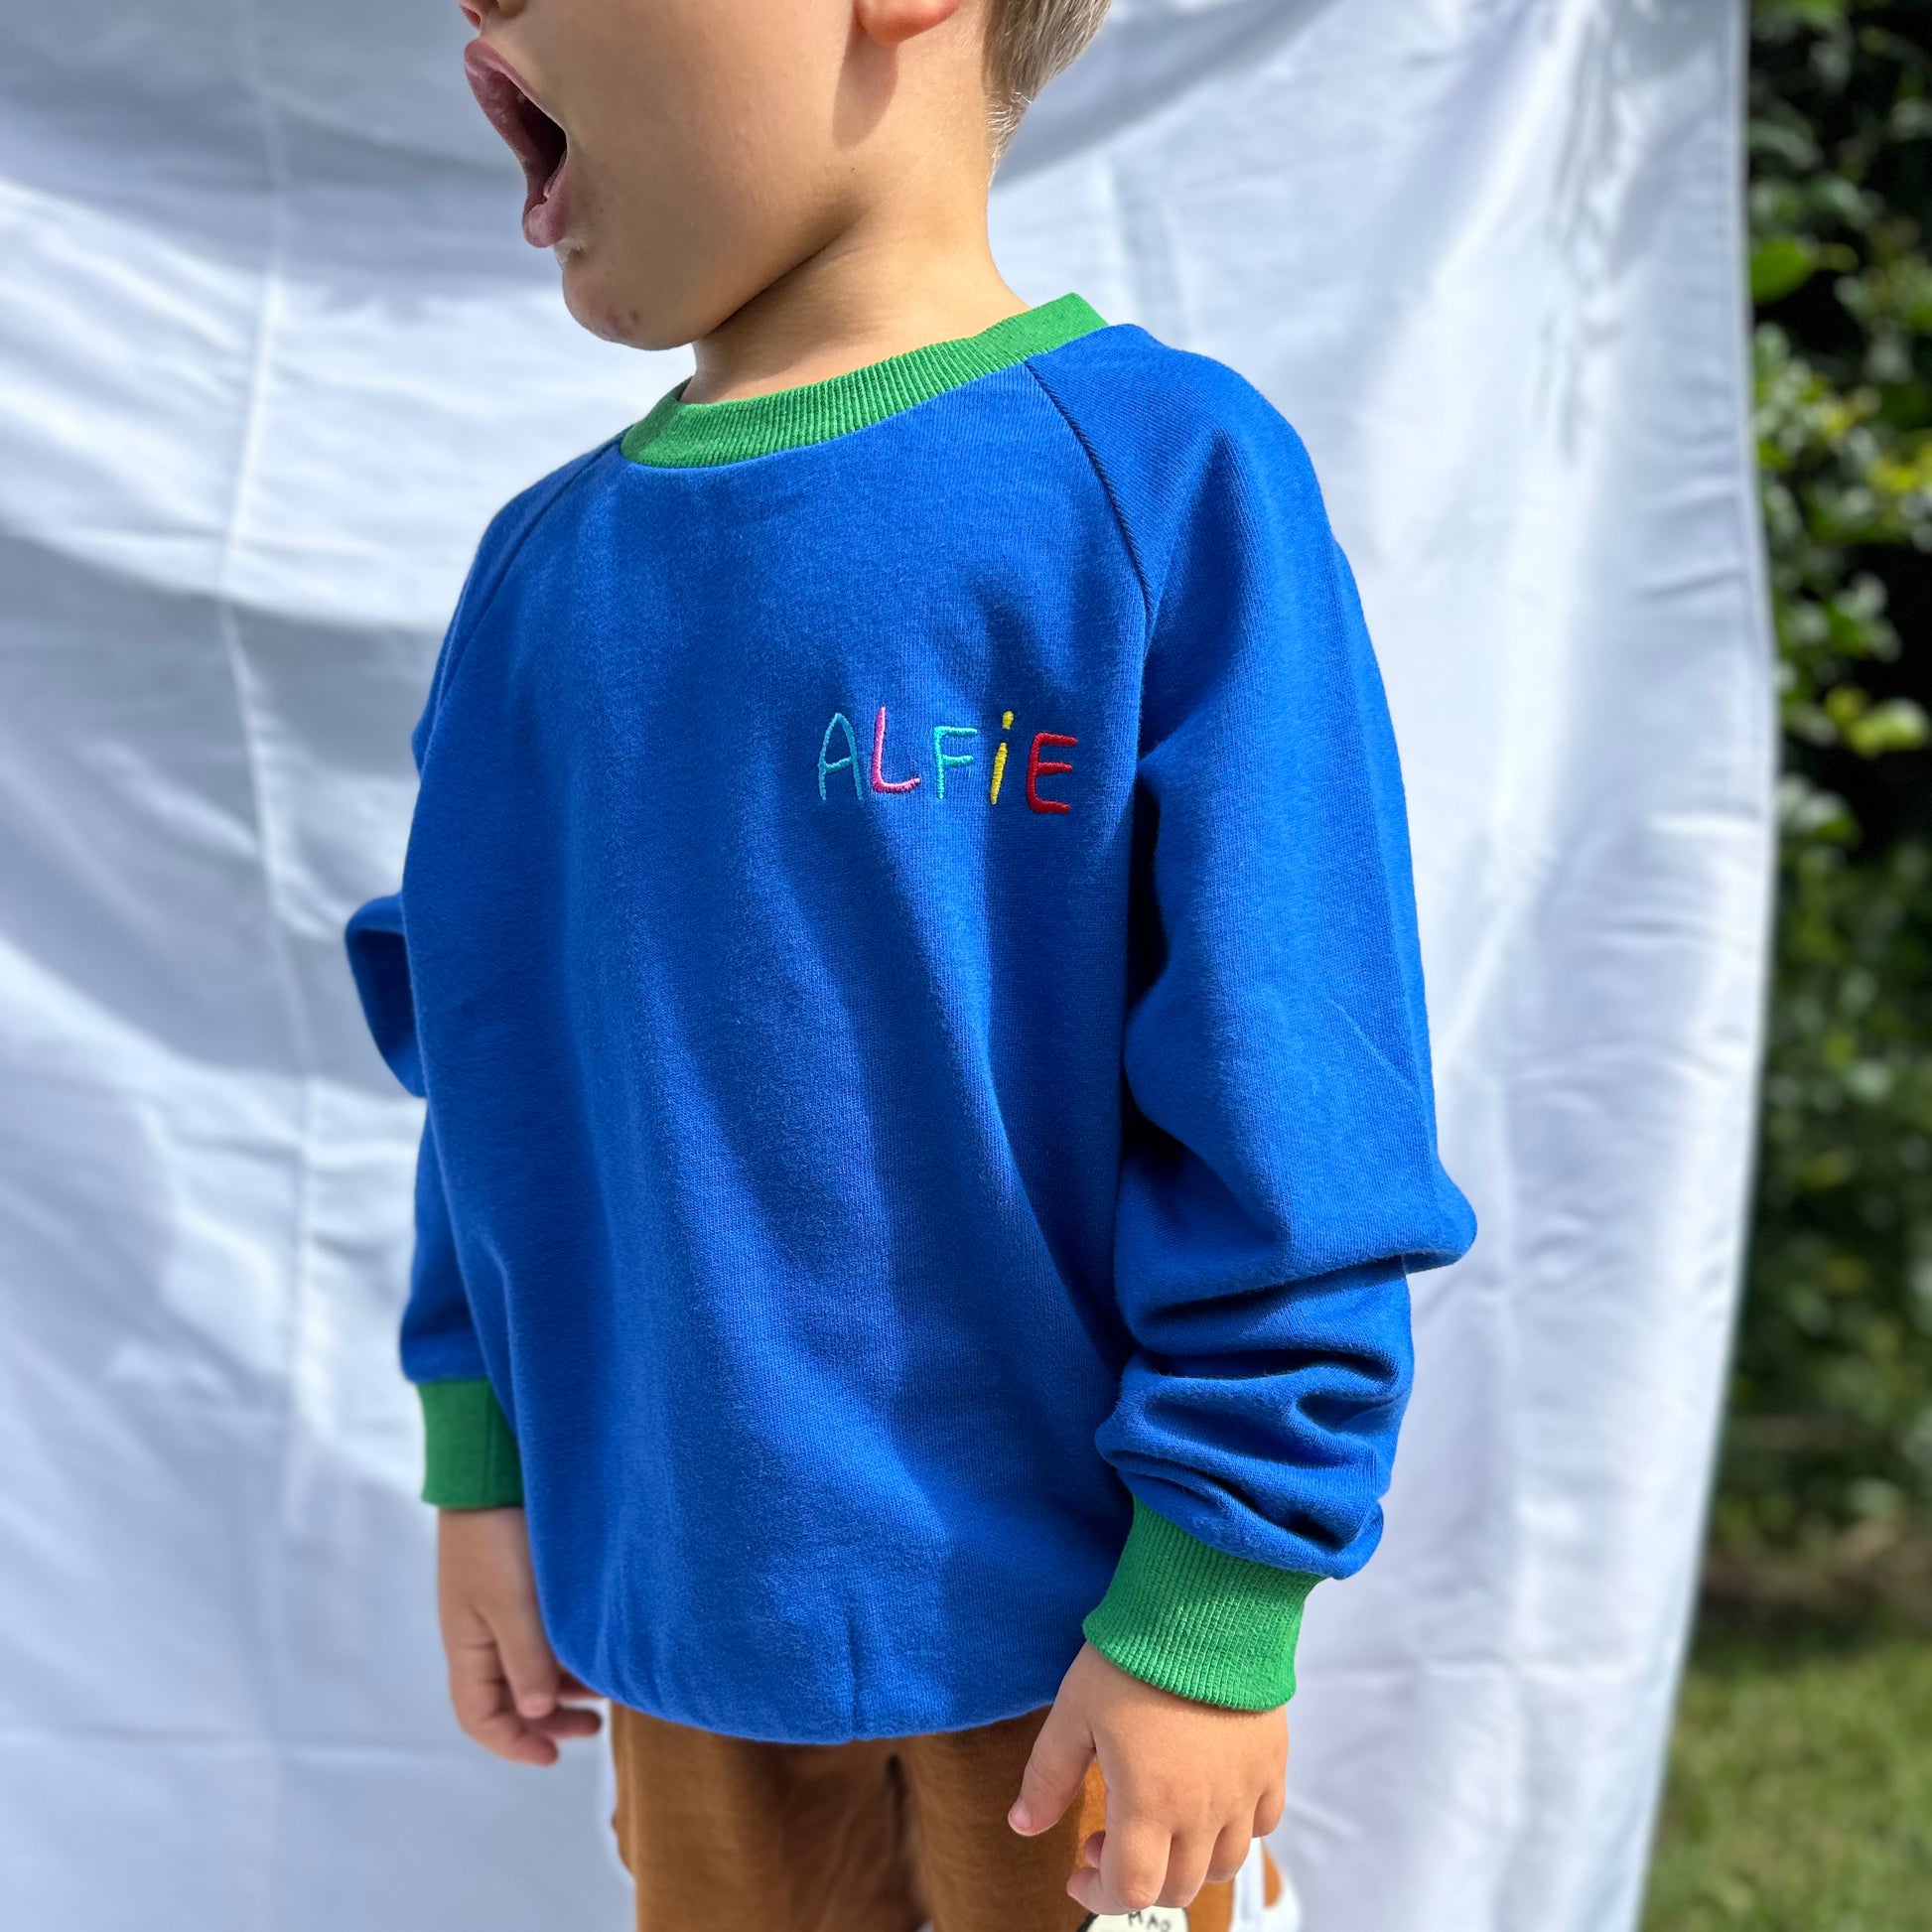 Alfie Blue Bandicoot Jumper French Terry Cotton Red Sweater with Green Trim and Embroidered Logo